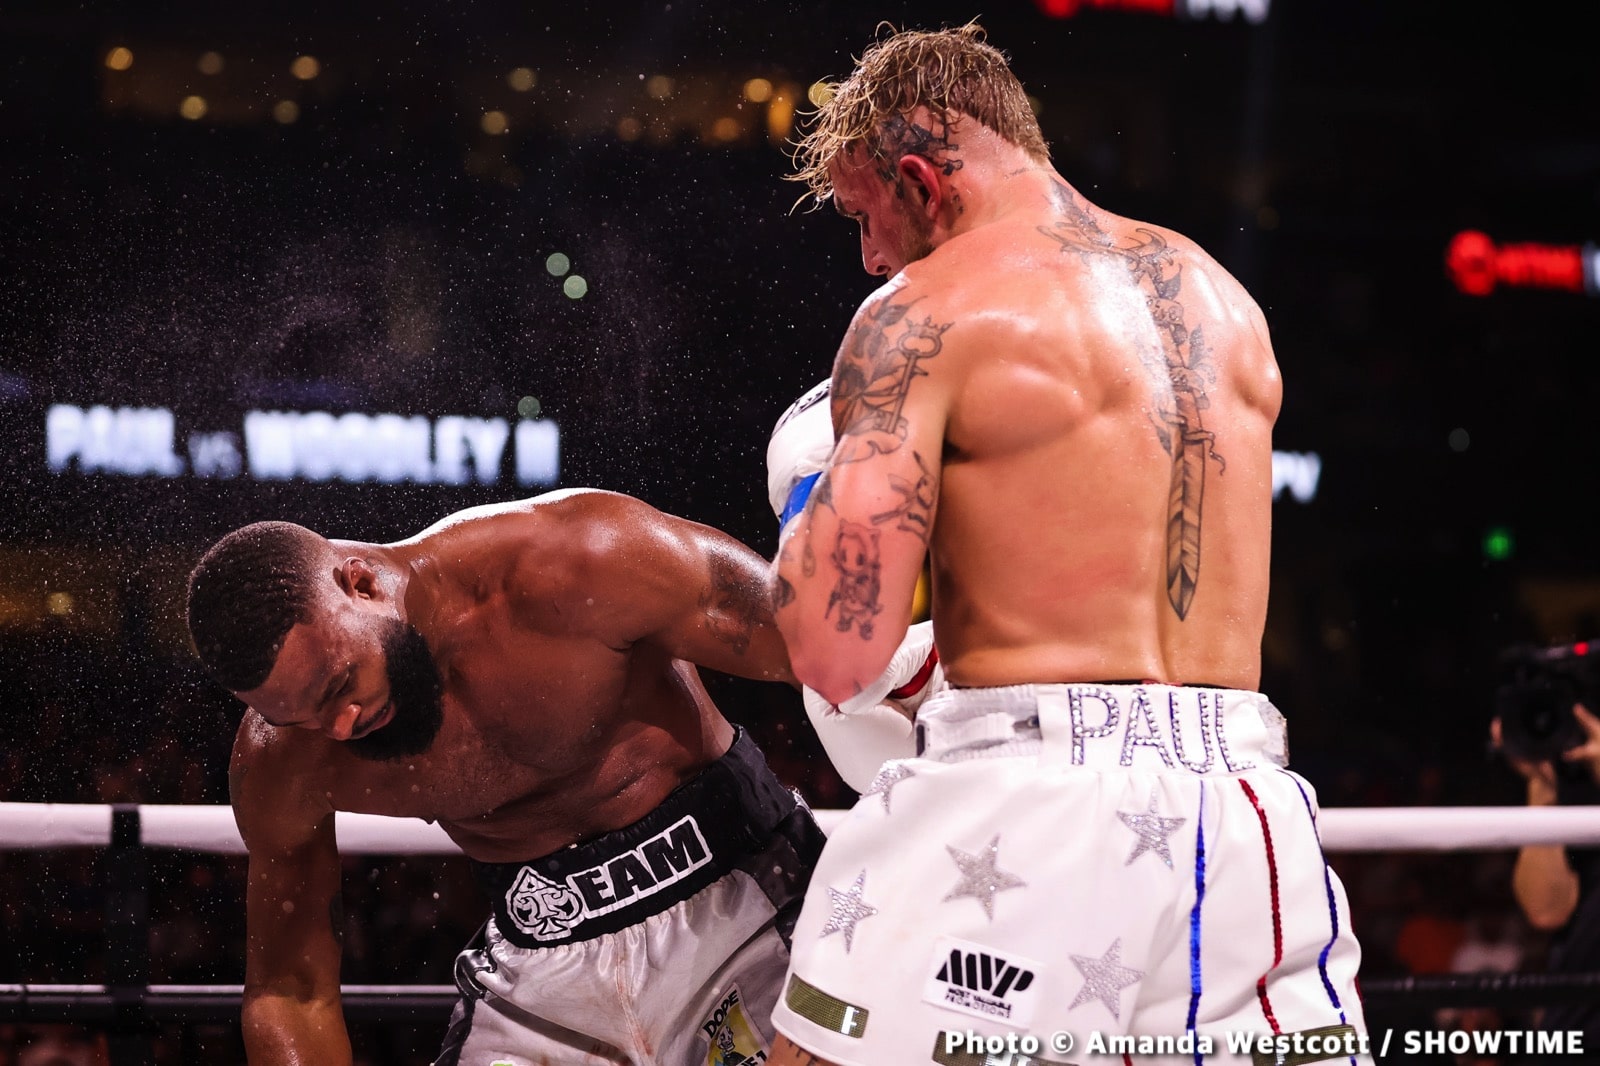 Jake Paul leaves No Doubt He Has Power KOing Woodley in the Sixth - Boxing Results